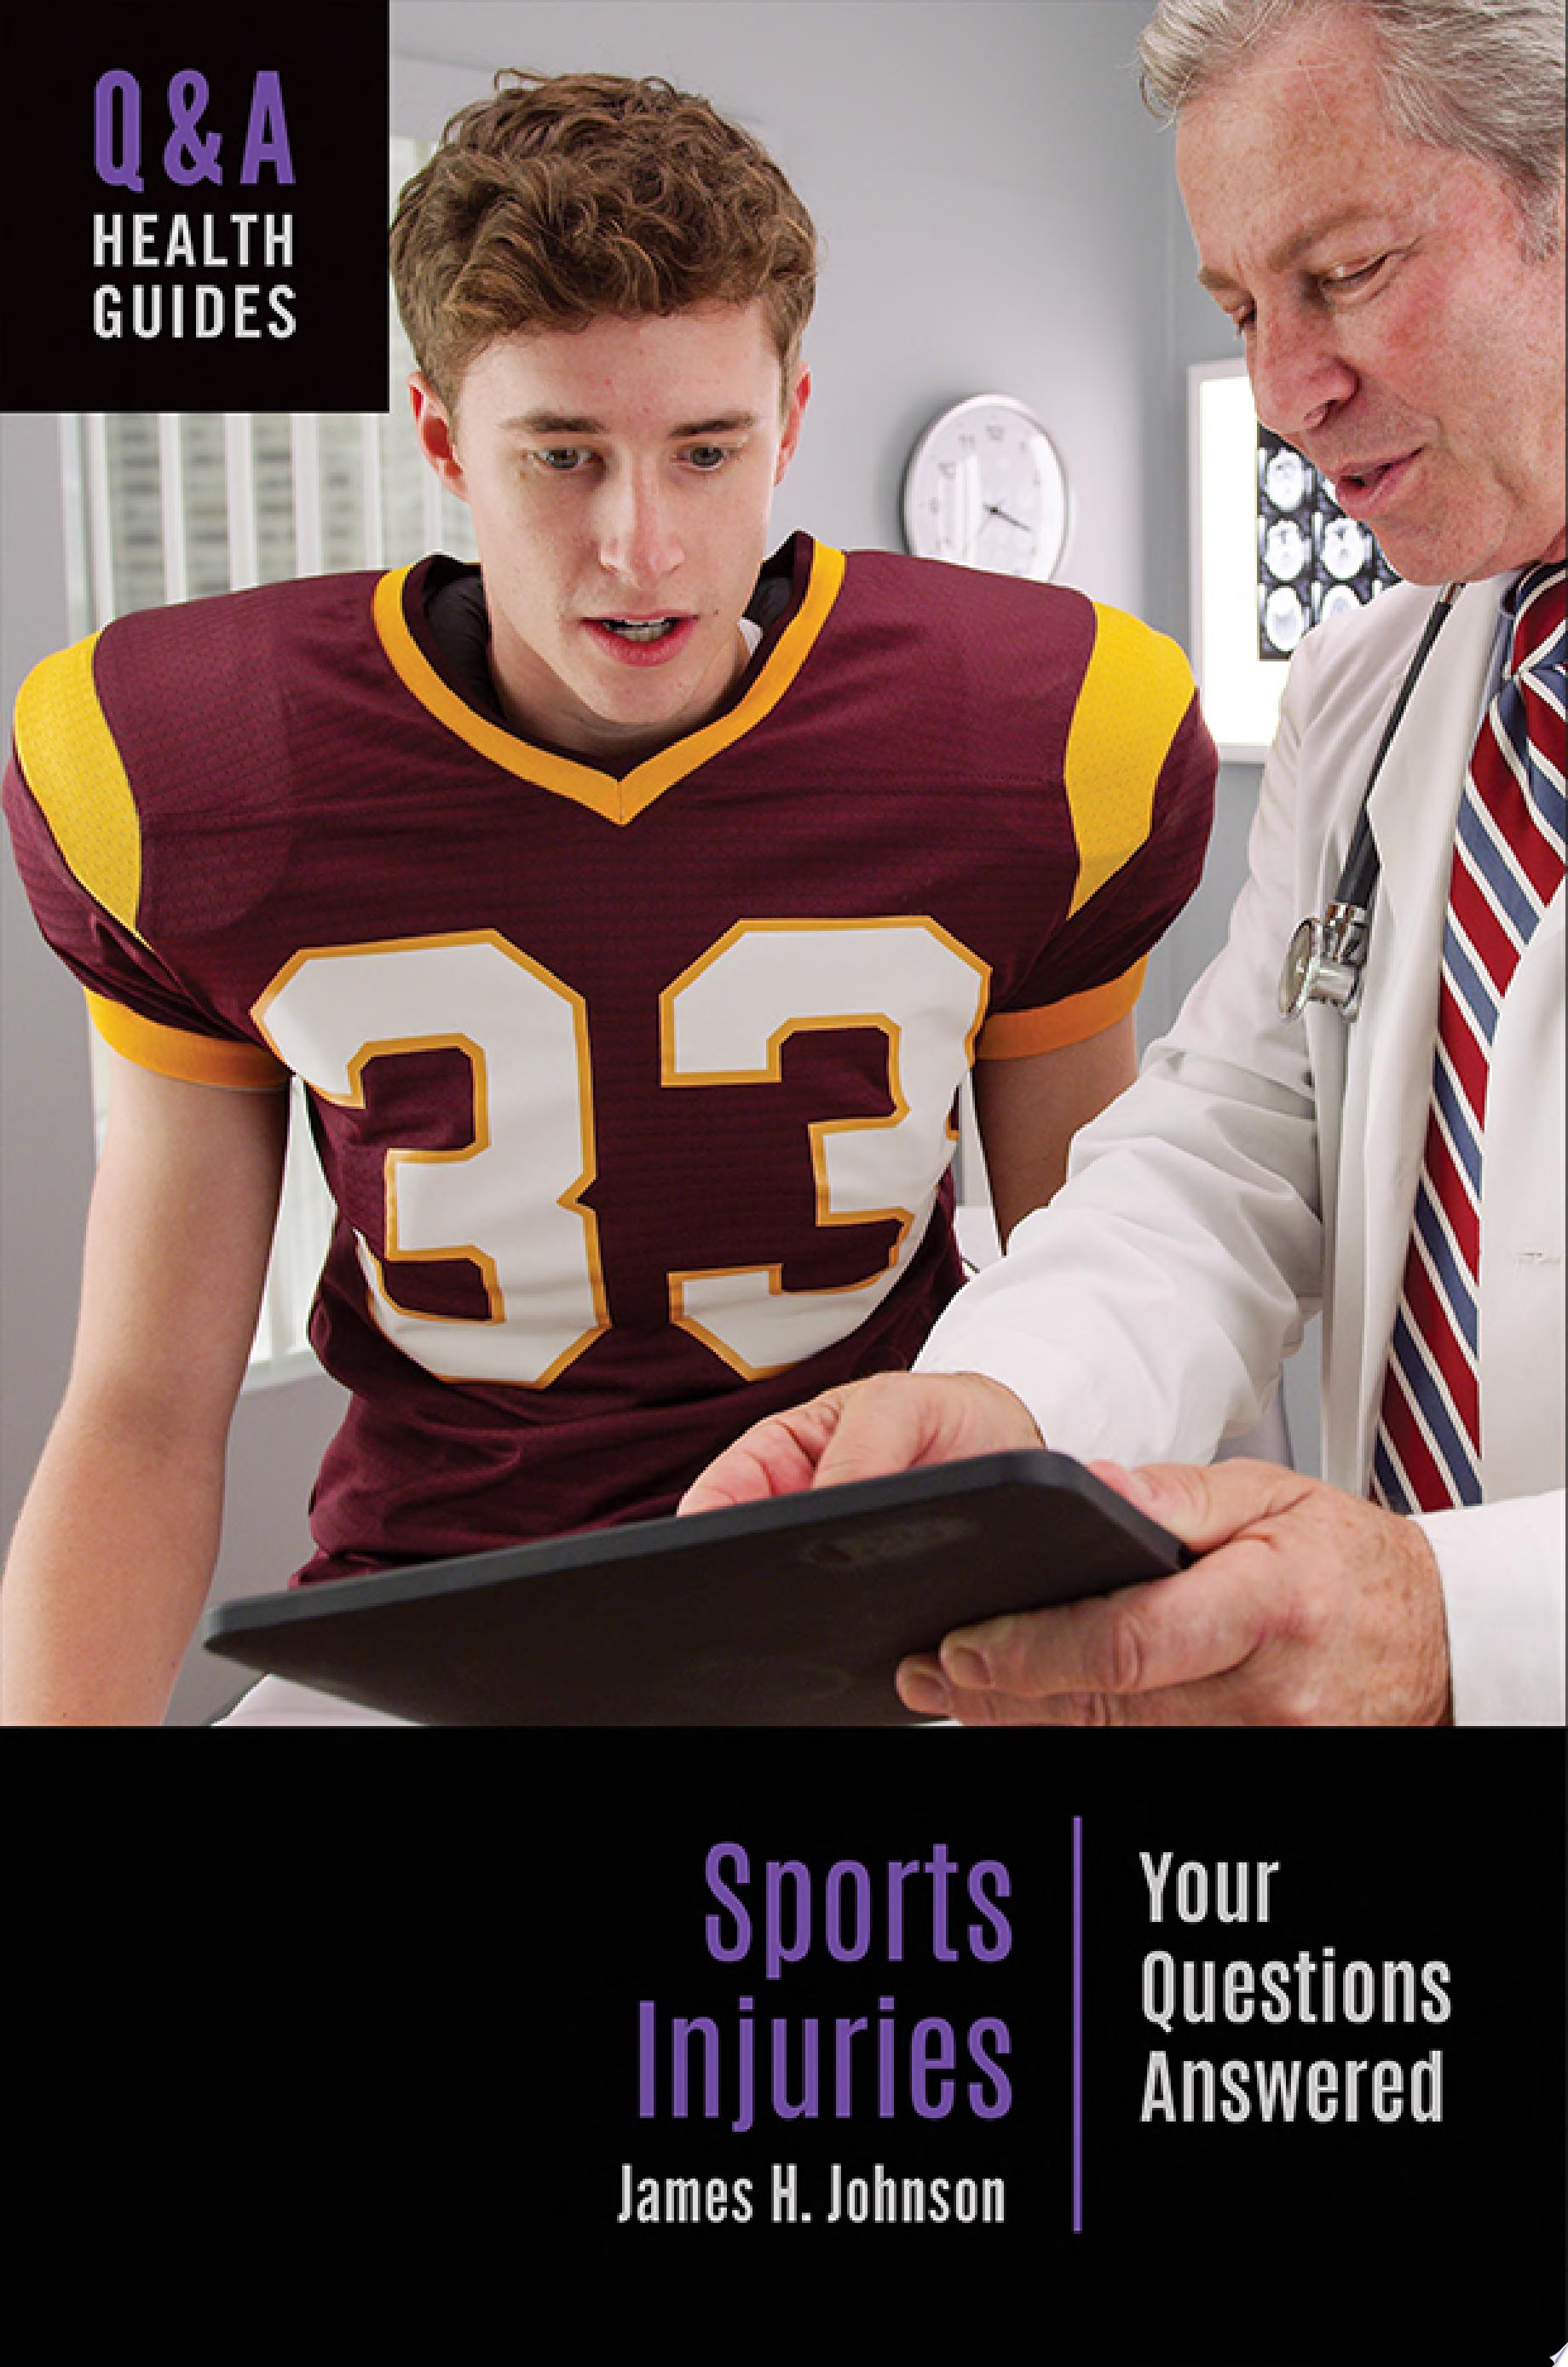 Image for "Sports Injuries: Your Questions Answered"